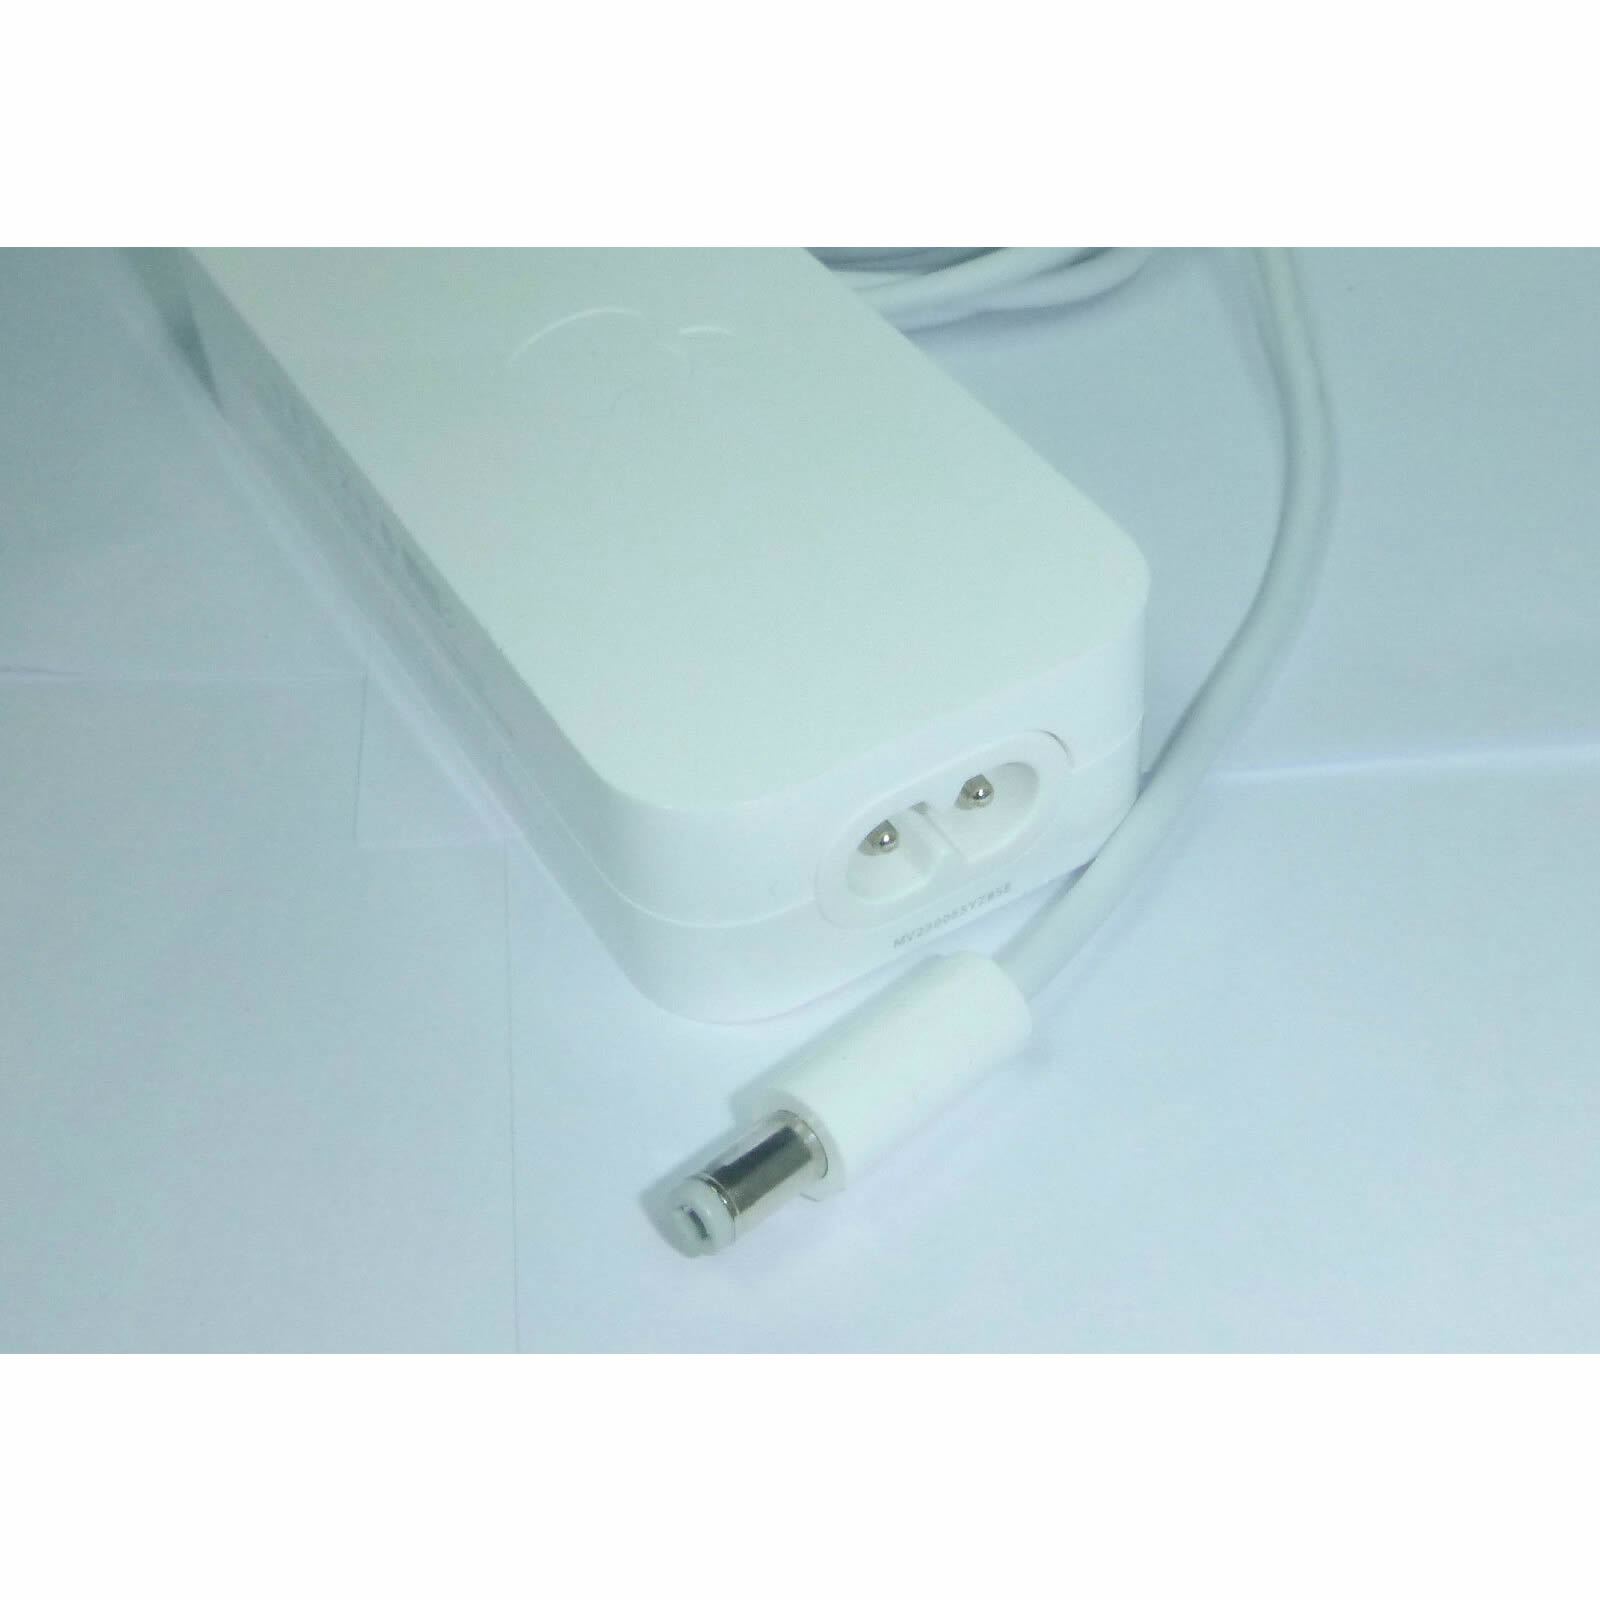 Apple 12V 1.8A 22W A1202 Original Power Supply Adapter  for APPLE Airport Extreme A1143 A1354 A1301